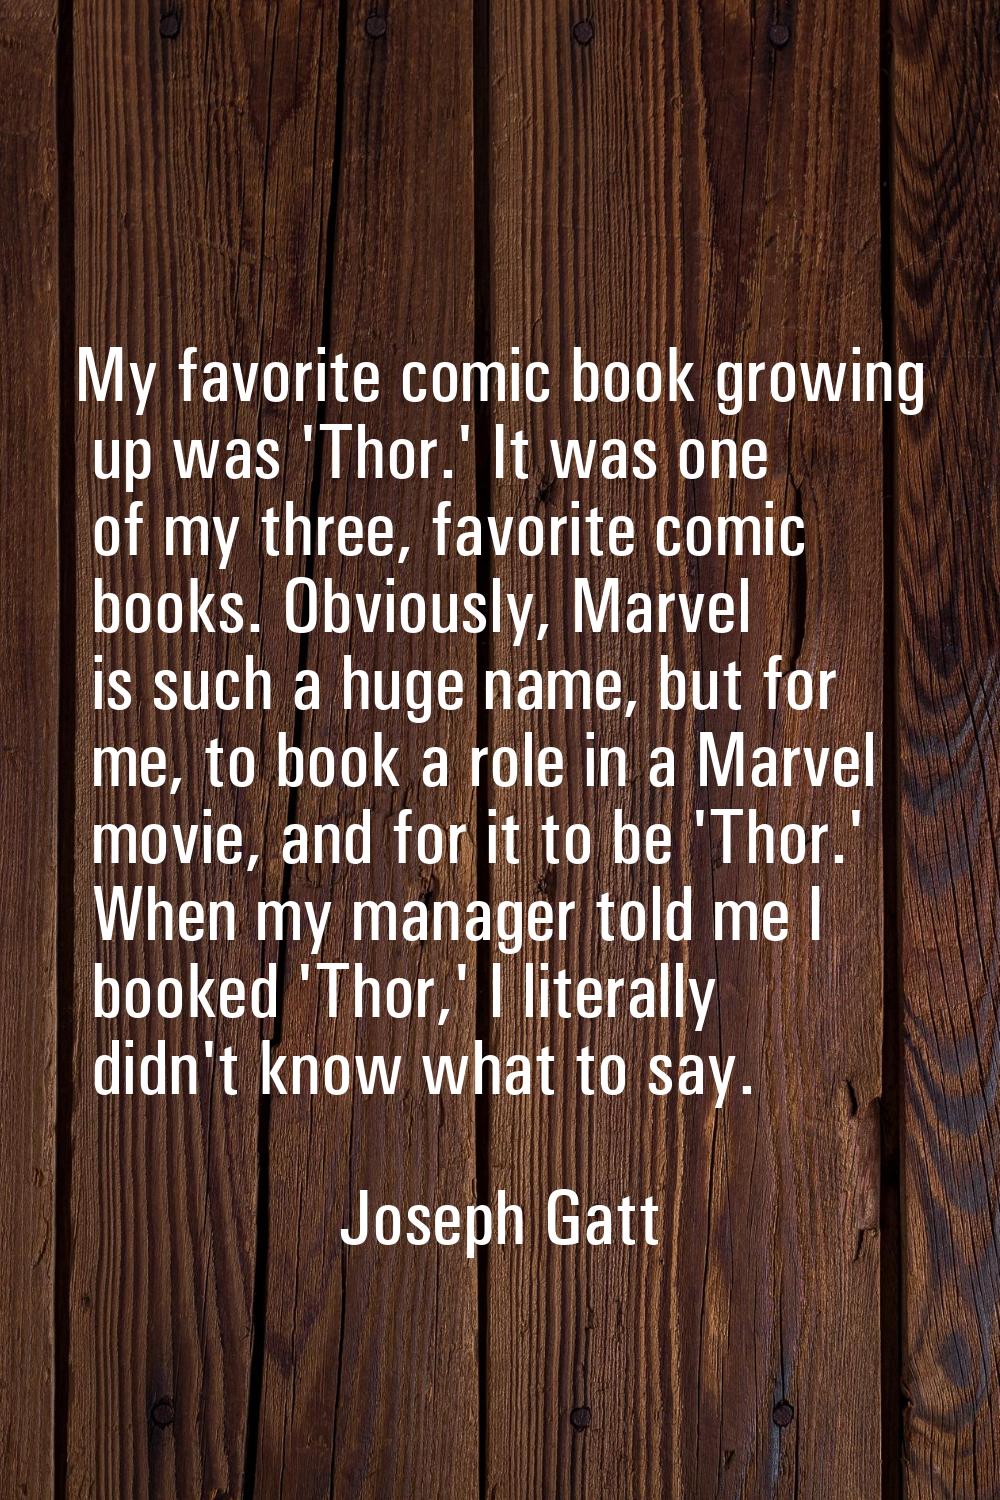 My favorite comic book growing up was 'Thor.' It was one of my three, favorite comic books. Obvious